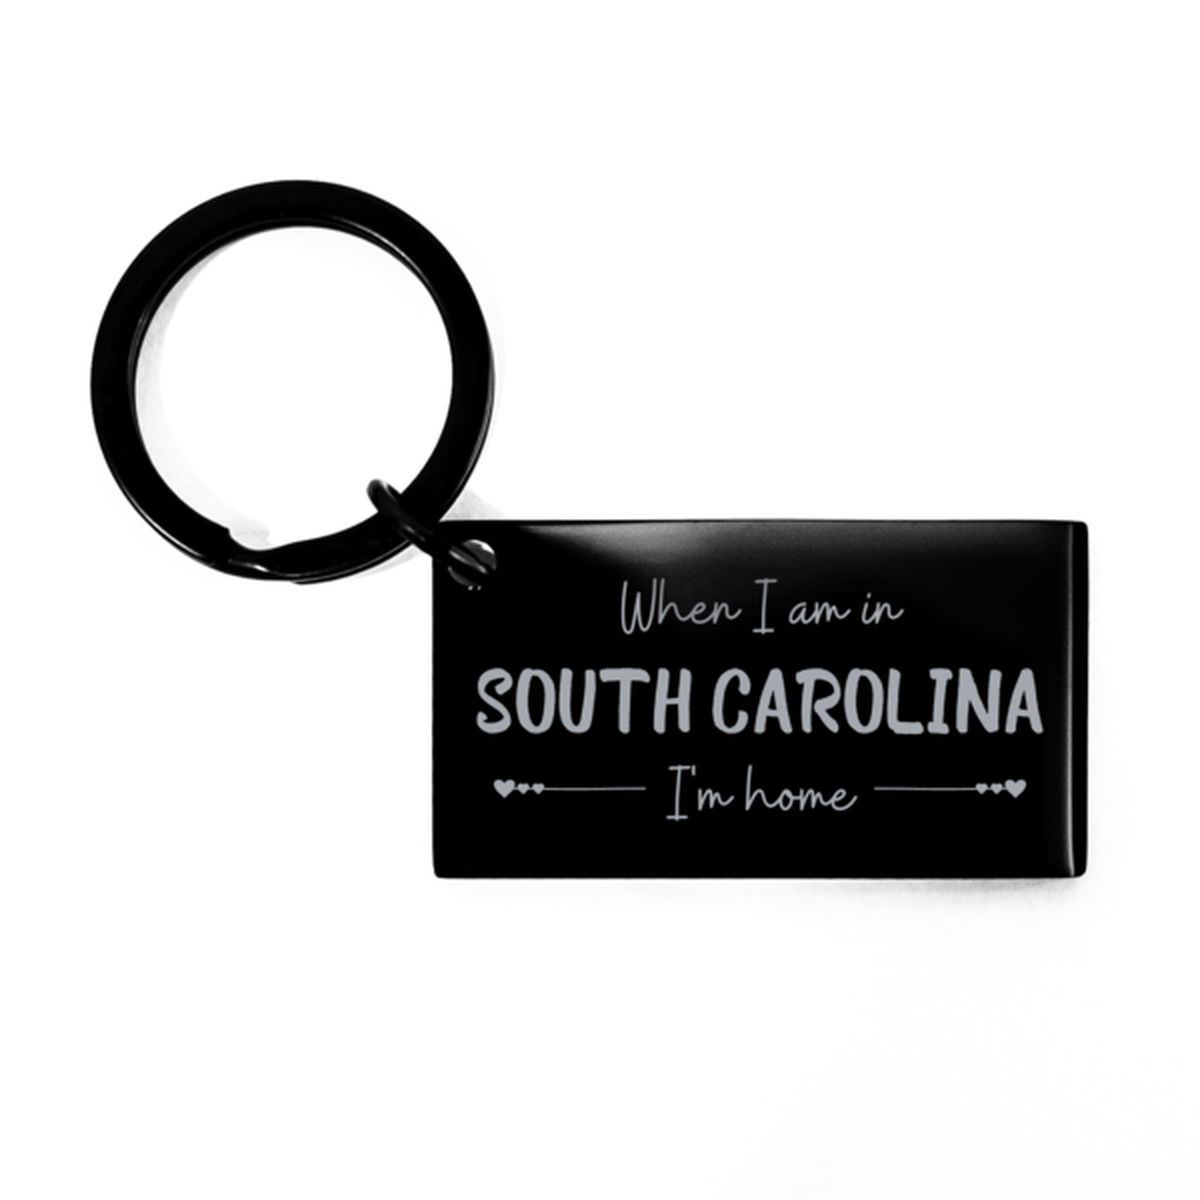 When I am in South Carolina I'm home Keychain, Cheap Gifts For South Carolina, State South Carolina Birthday Gifts for Friends Coworker